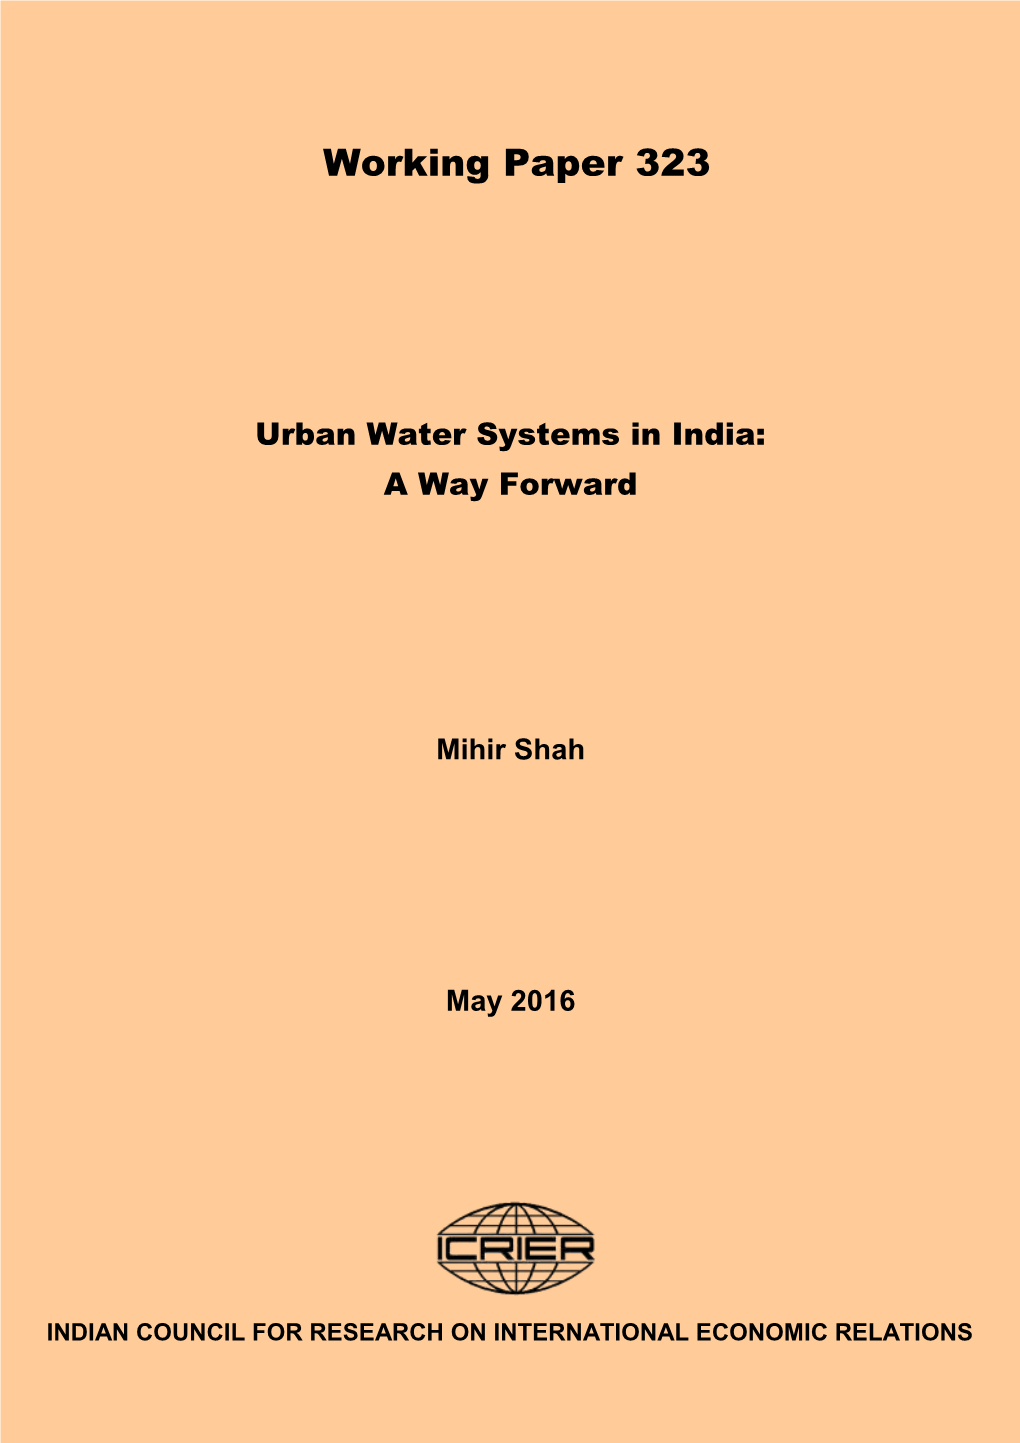 Urban Water Systems in India: a Way Forward